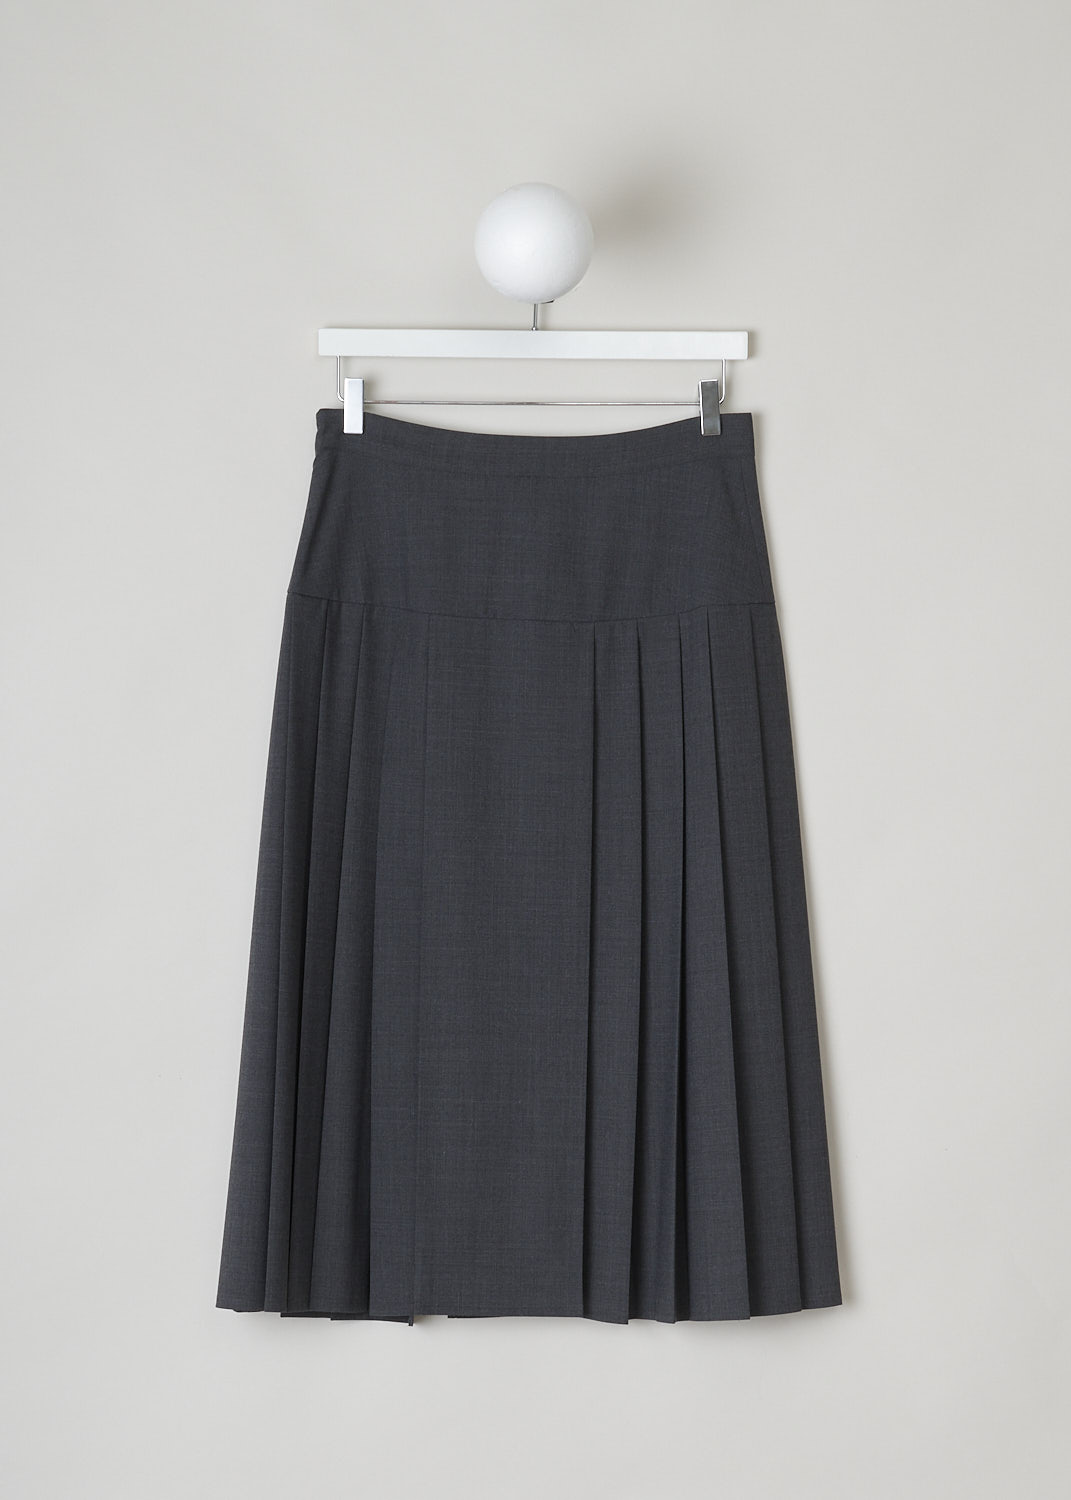 ASPESI, GREY PLEATED MIDI SKIRT, 2207_G286_01197, Grey, Back, This grey wool-blend midi skirt has a broad waistband and pleats along the sides. The skirt has a straight hemline. A concealed zipper in the side seam functions as the closure option. 
